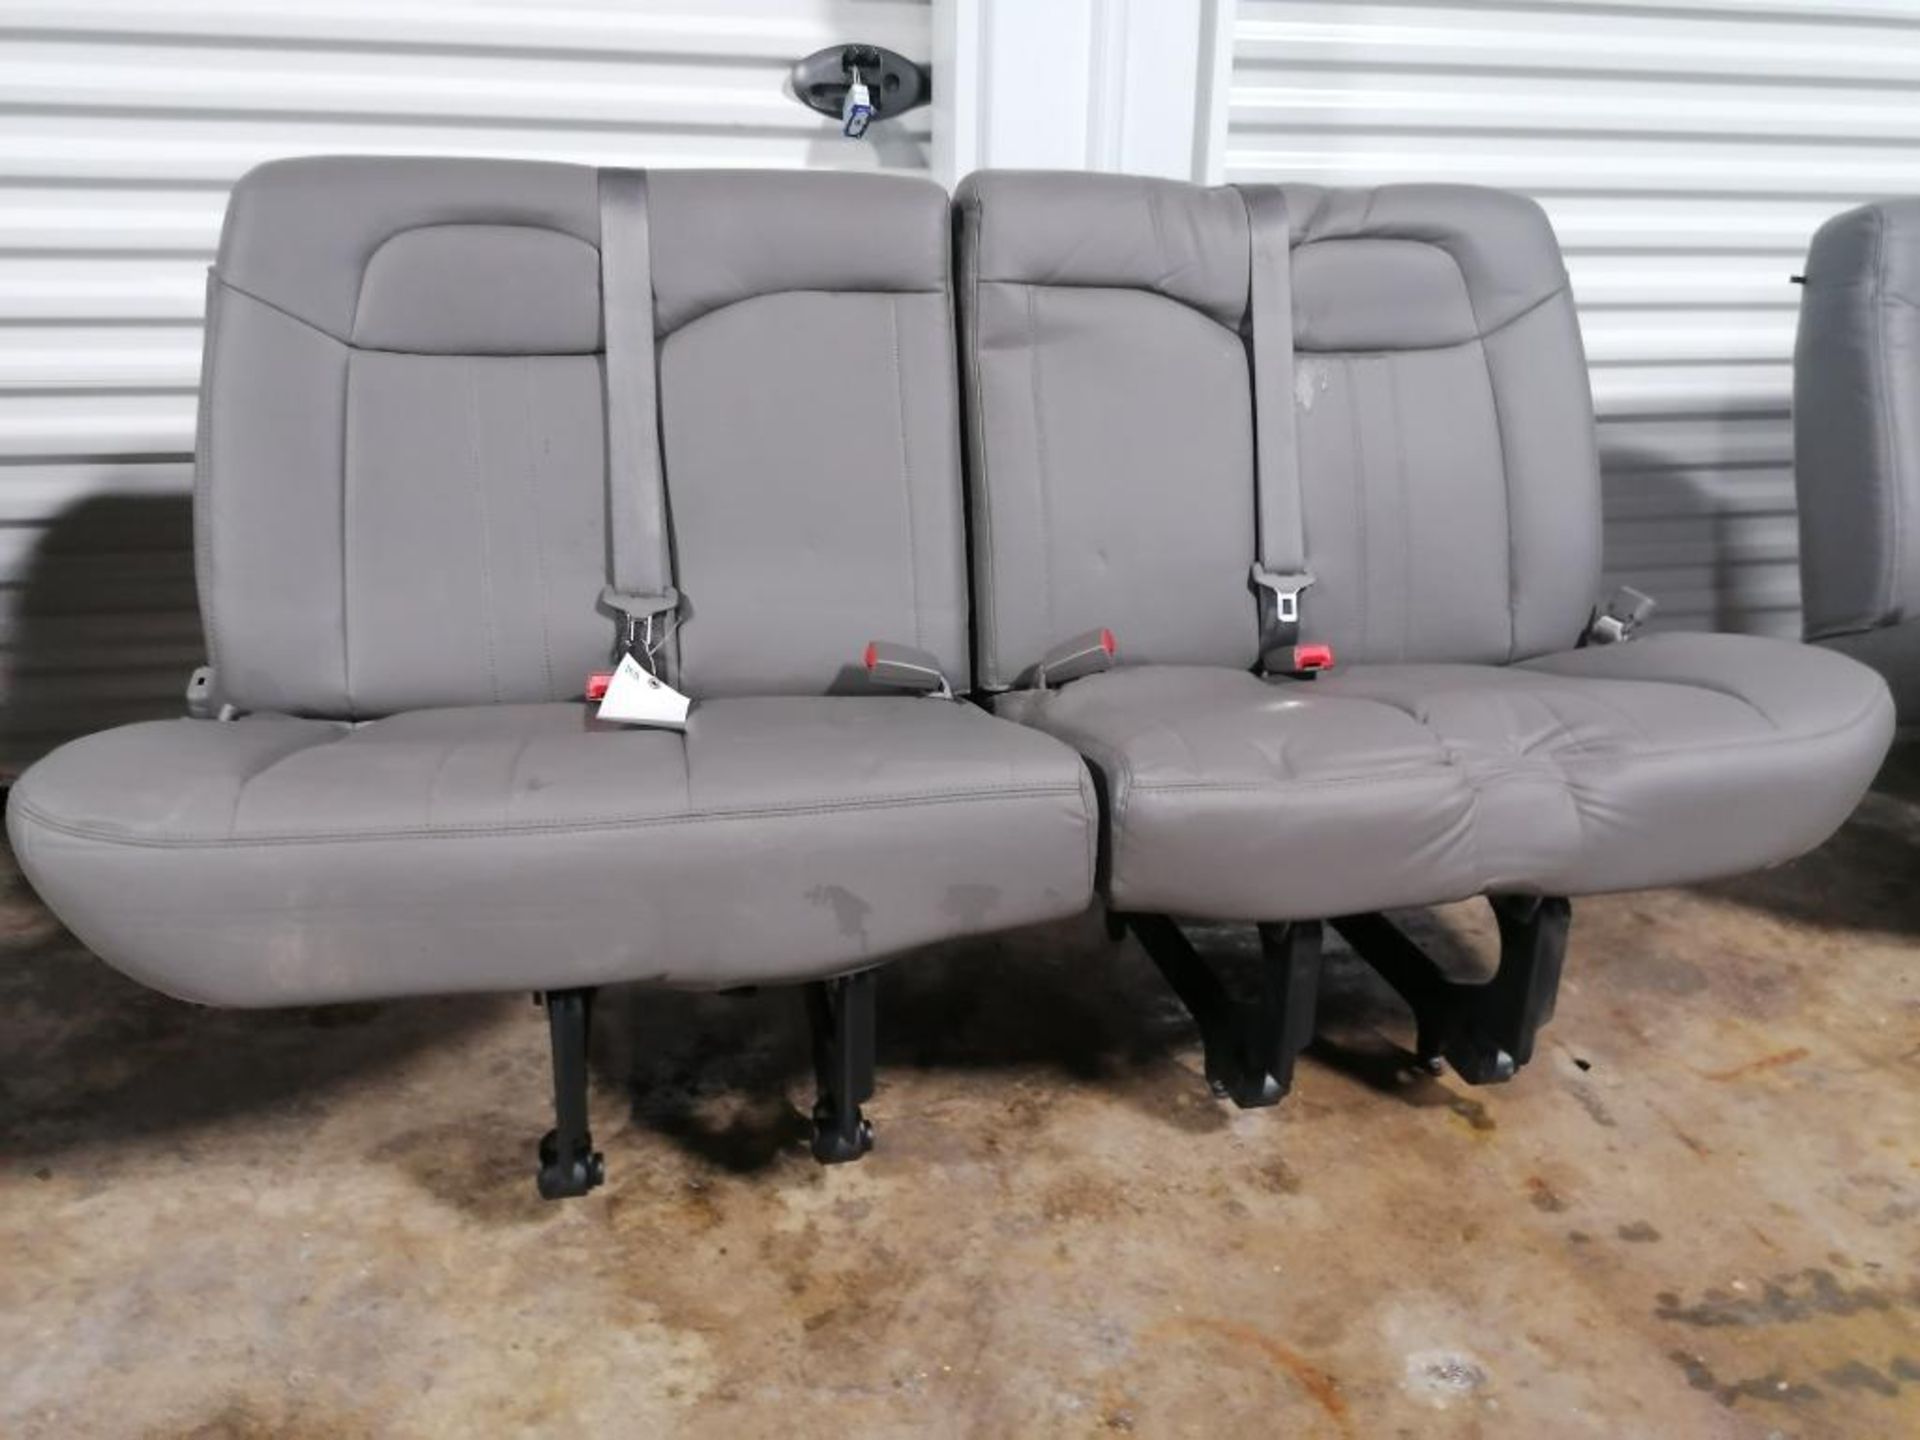 NEW 2021 Chevrolet Express Passenger Seat Row. Located in Mt. Pleasant, IA. - Image 4 of 4